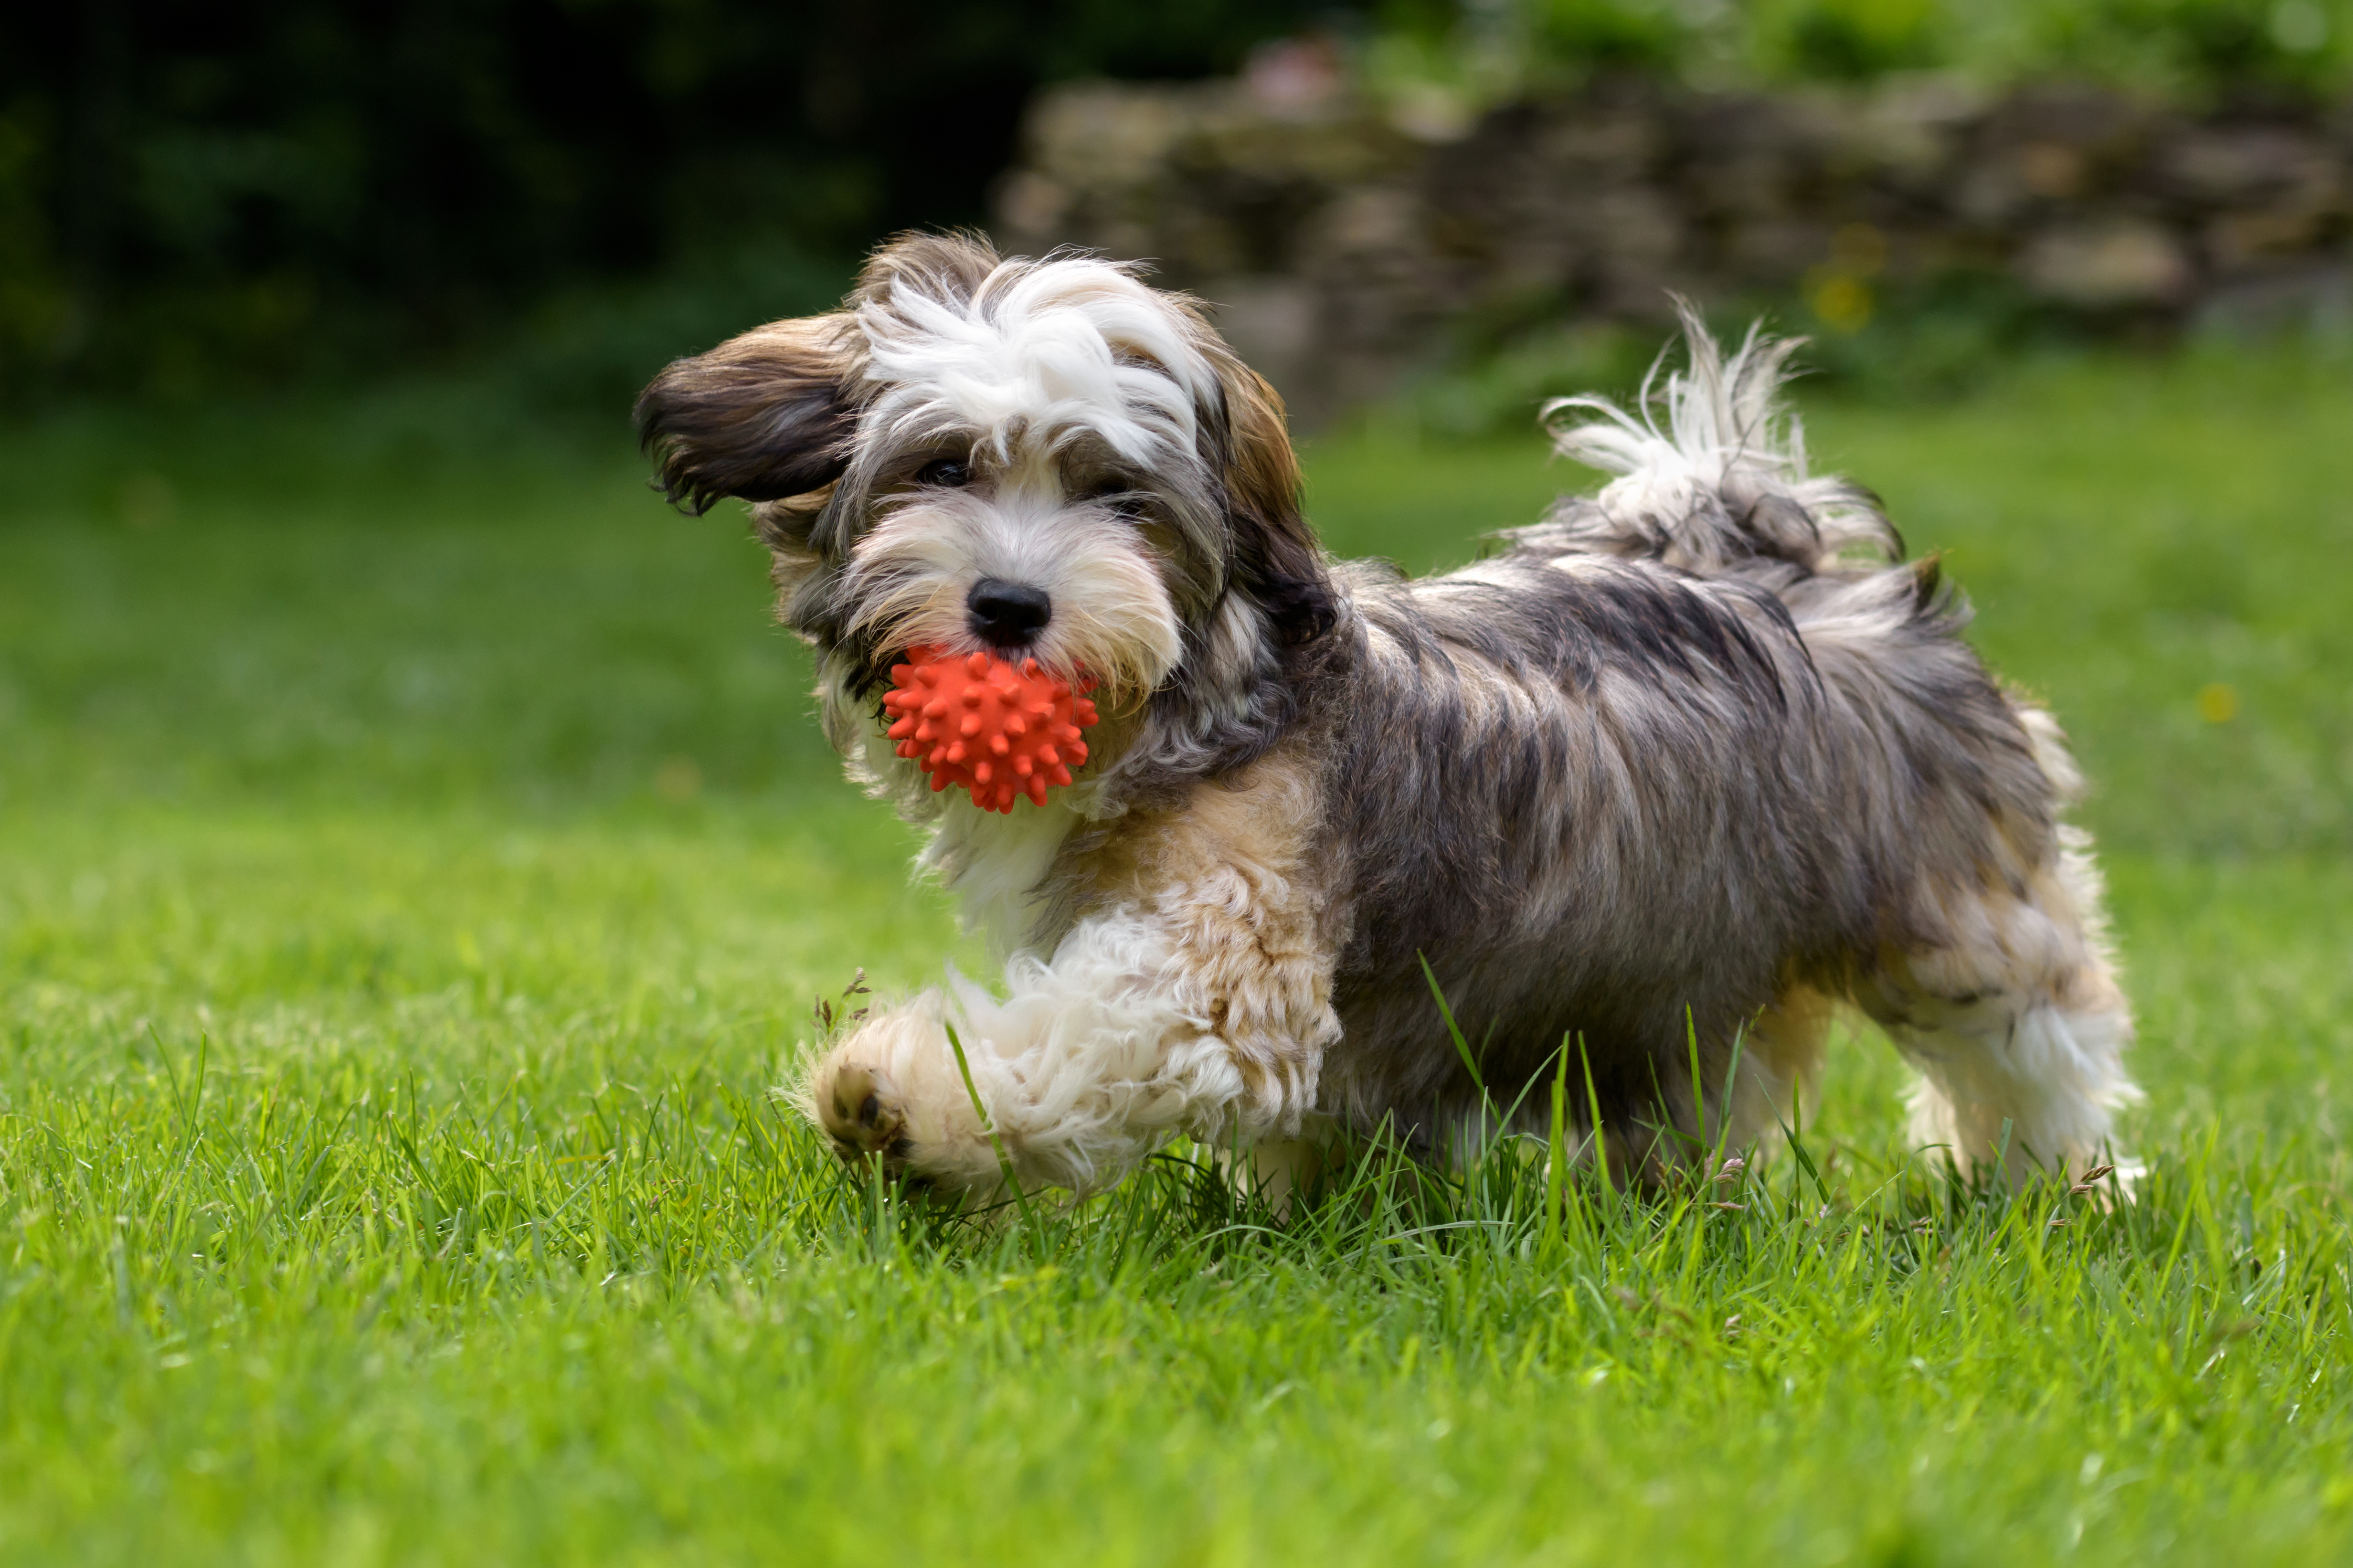 Playful havanese puppy dog walking with a red ball in his mouth in the grass and looking at camera